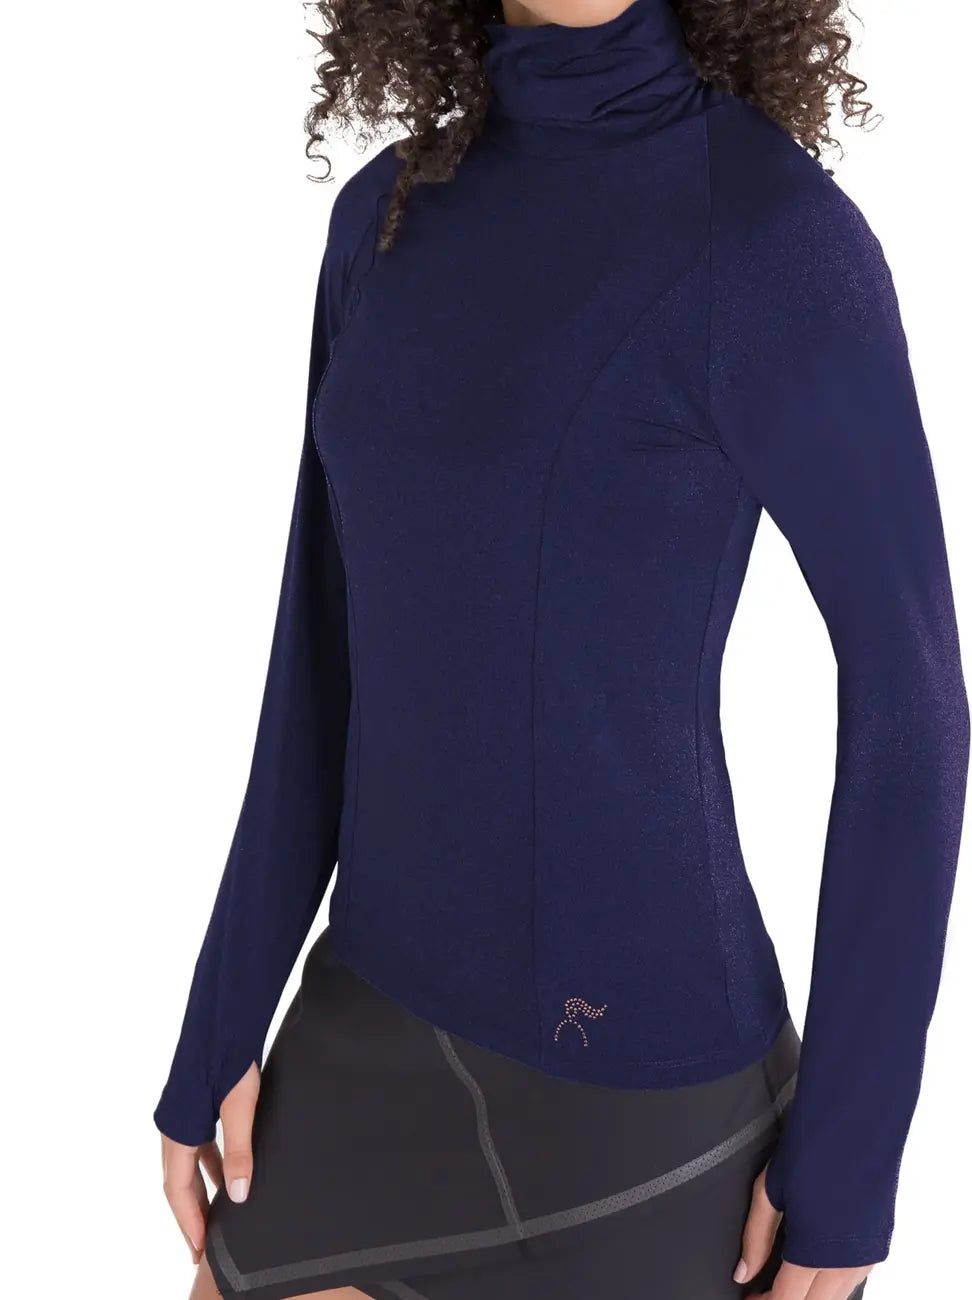 Get ready to layer up in style with our Sporty Soft Turtleneck Top in navy blue. Comfortable, versatile, and perfect for any occasion. 